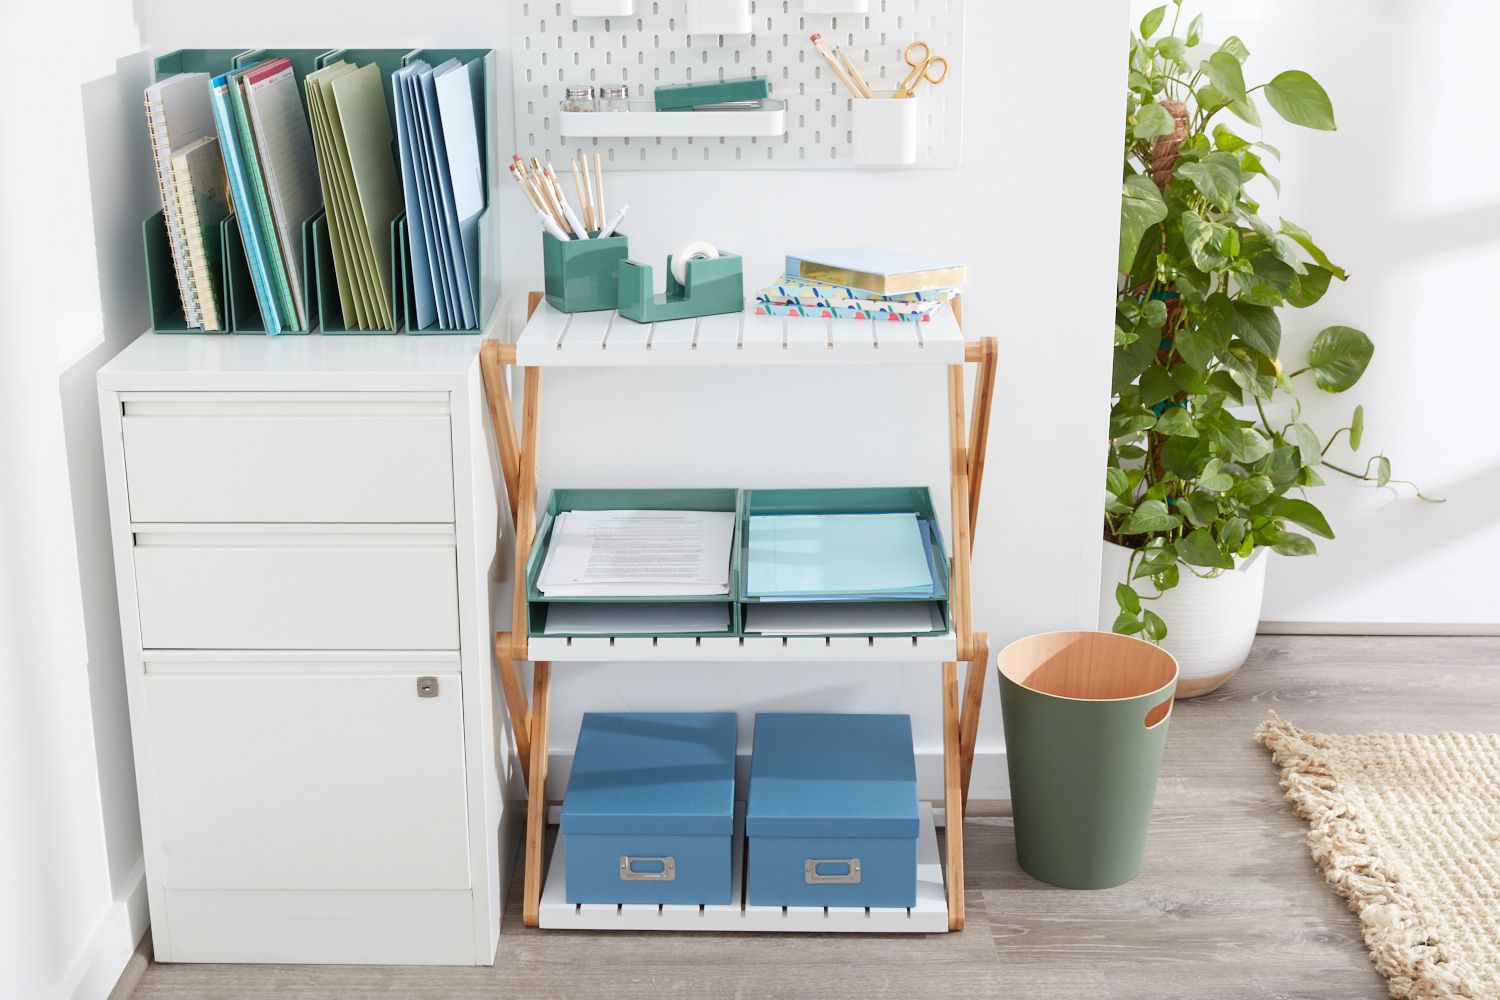 a - 13 quick and easy ways to organize your important documents using cardboard file holders